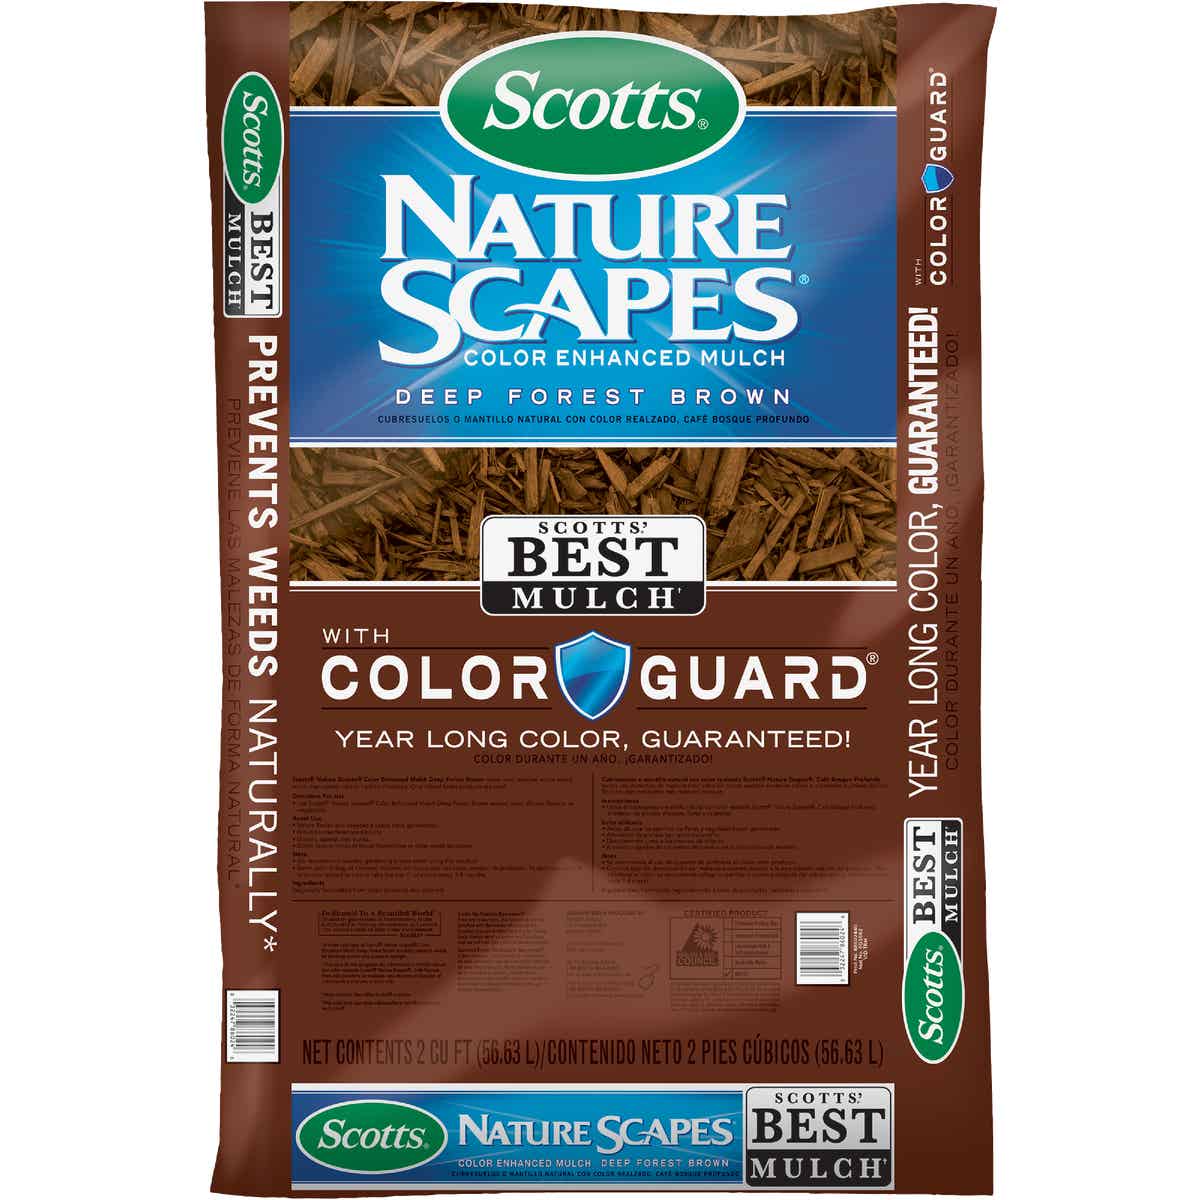 Image of Scotts Nature Scapes mulch around tree